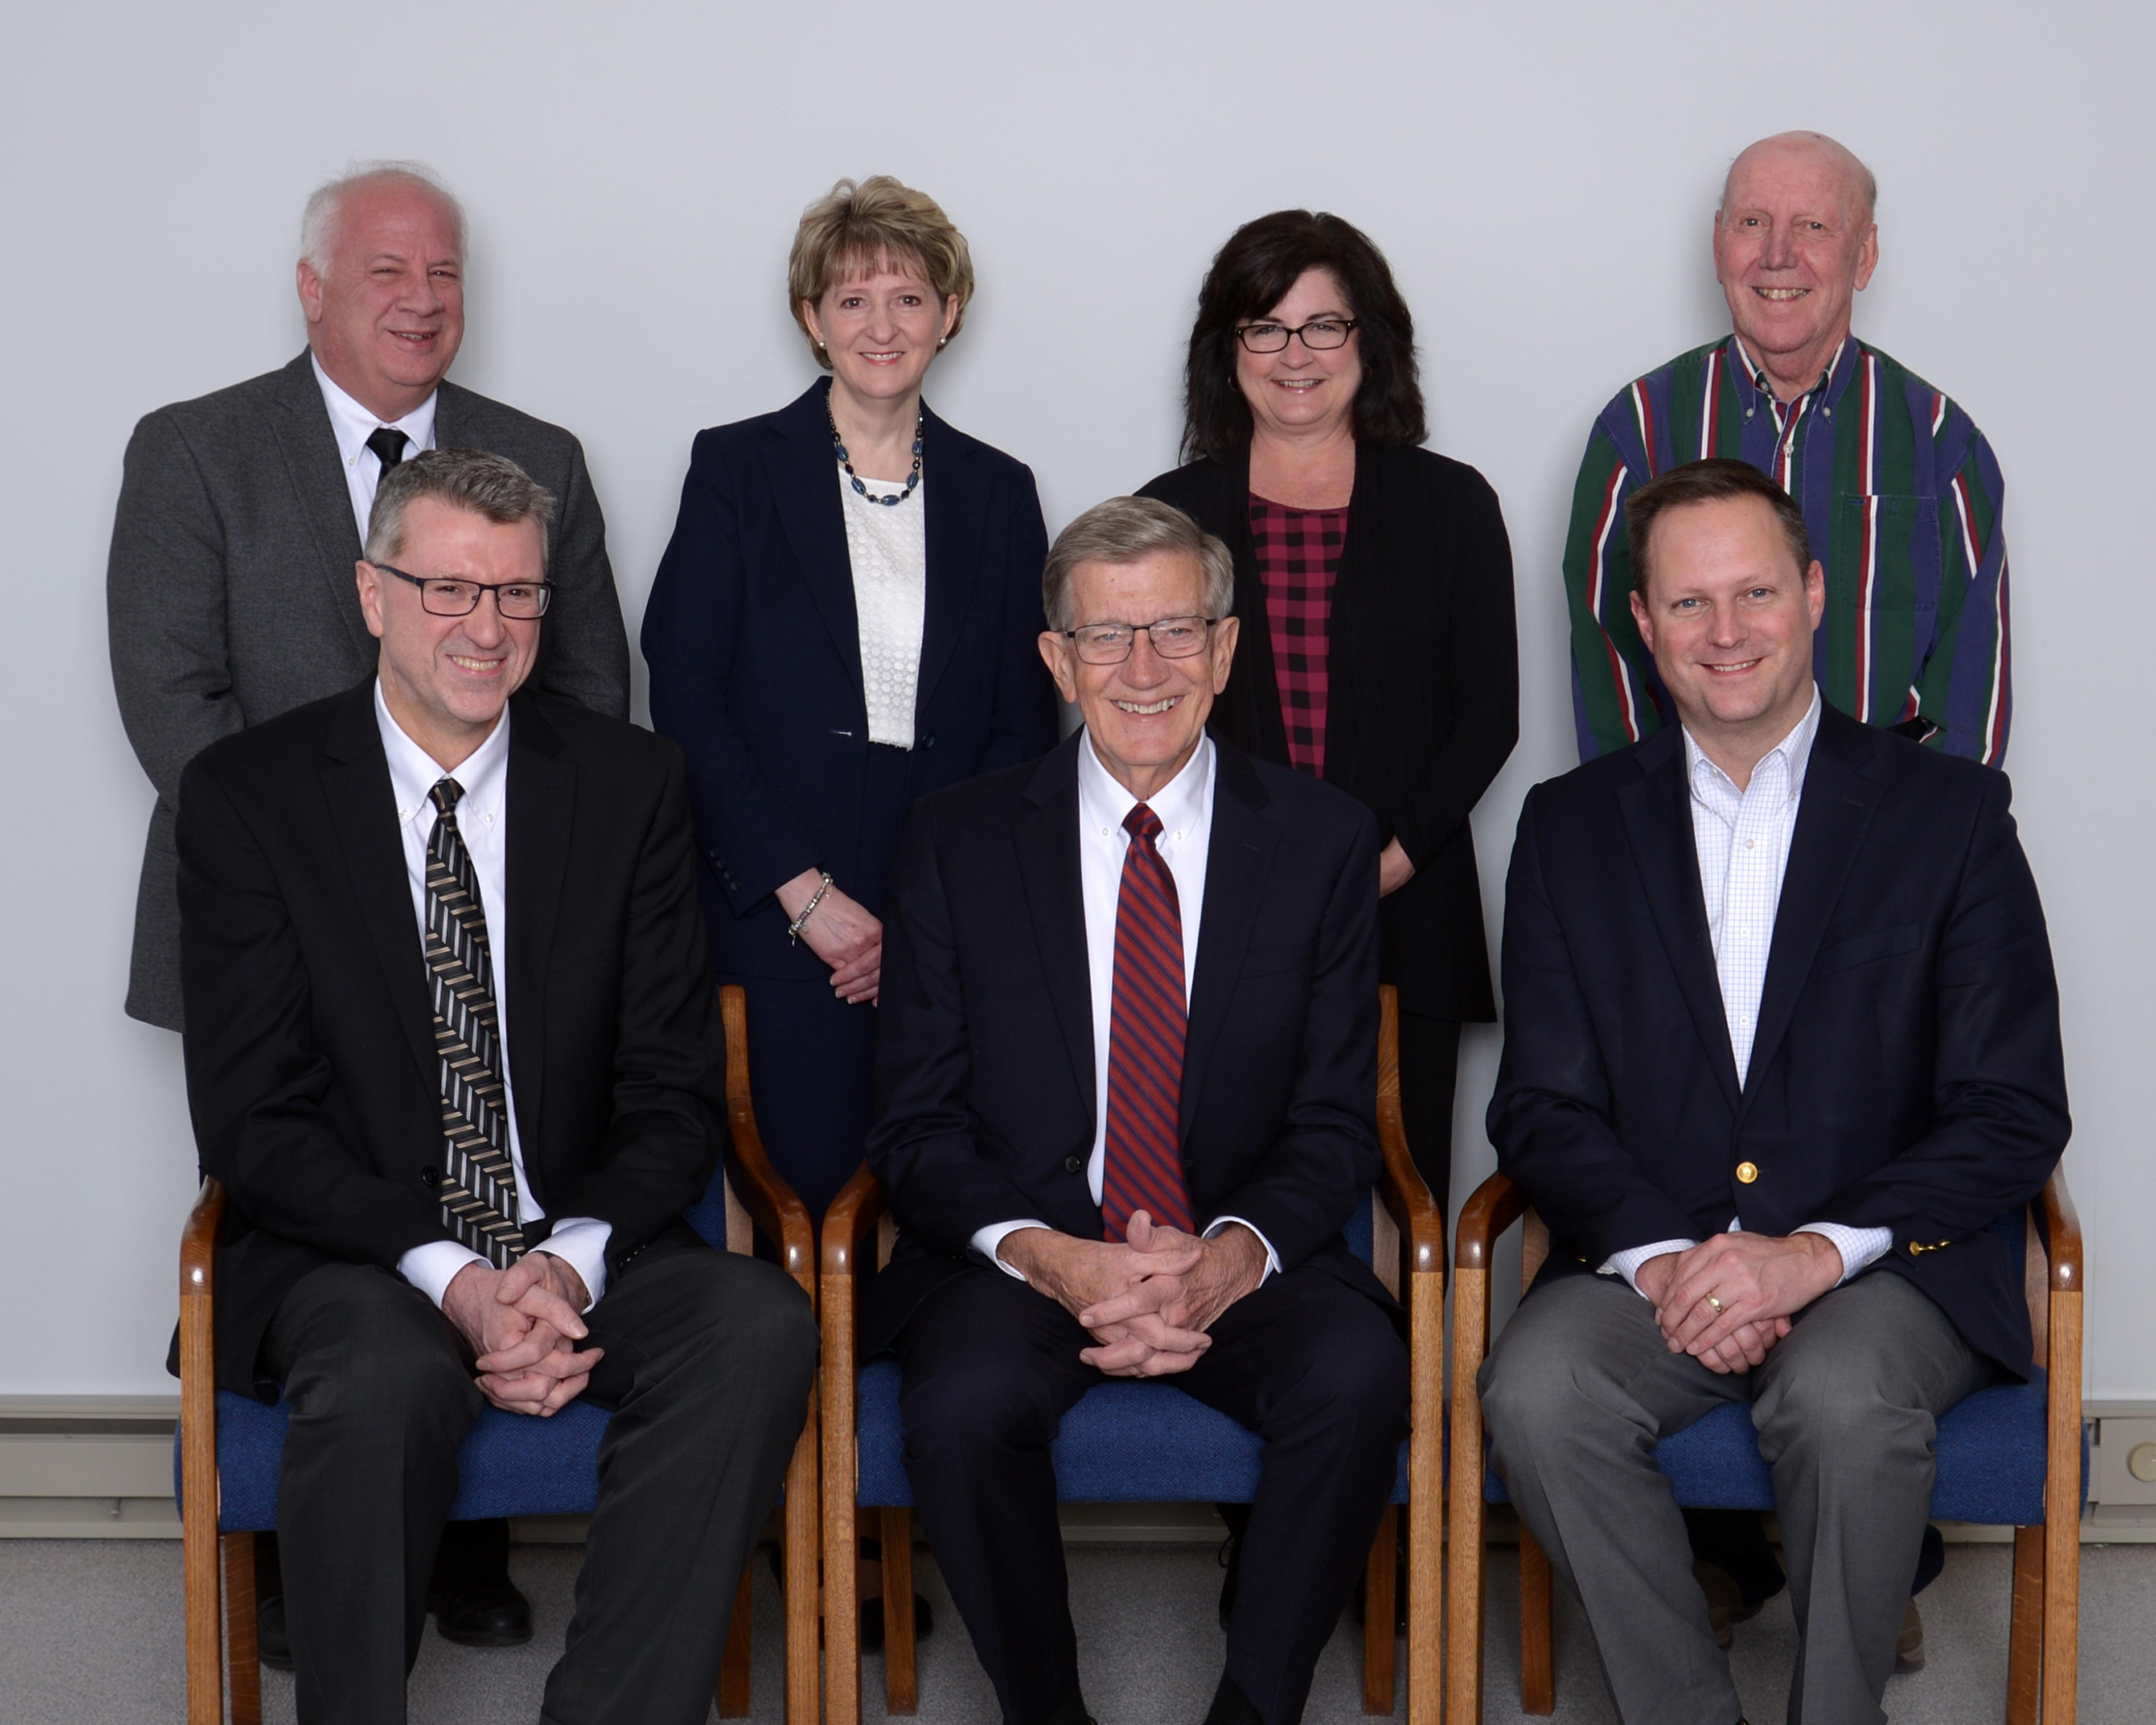 Board of Education Group Photo